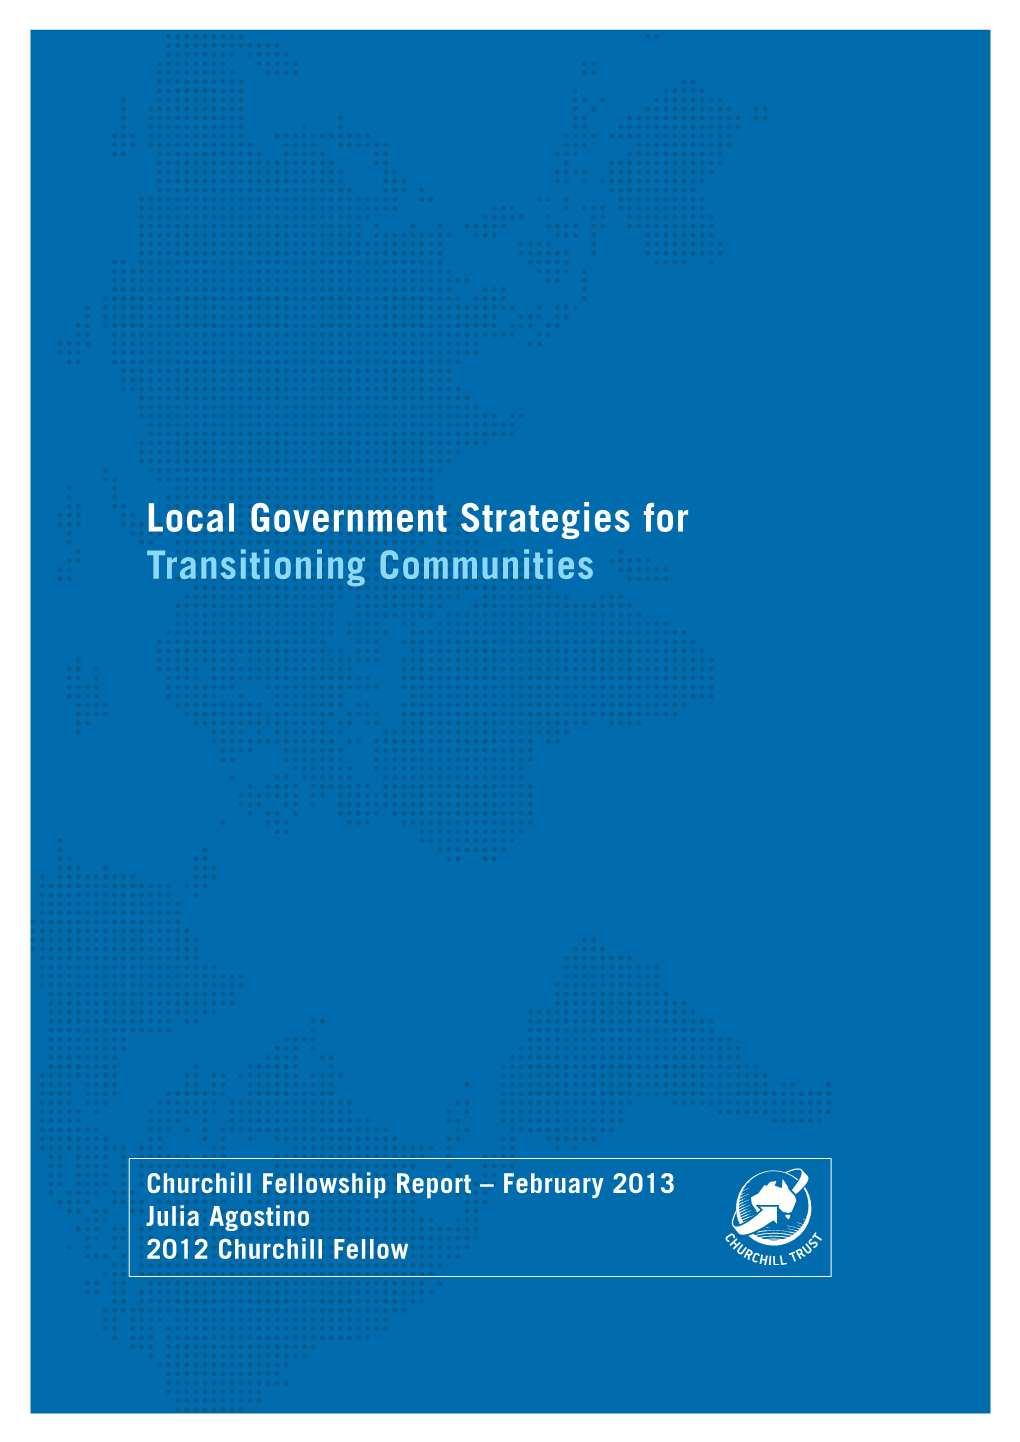 Local Government Strategies for Transitioning Communities